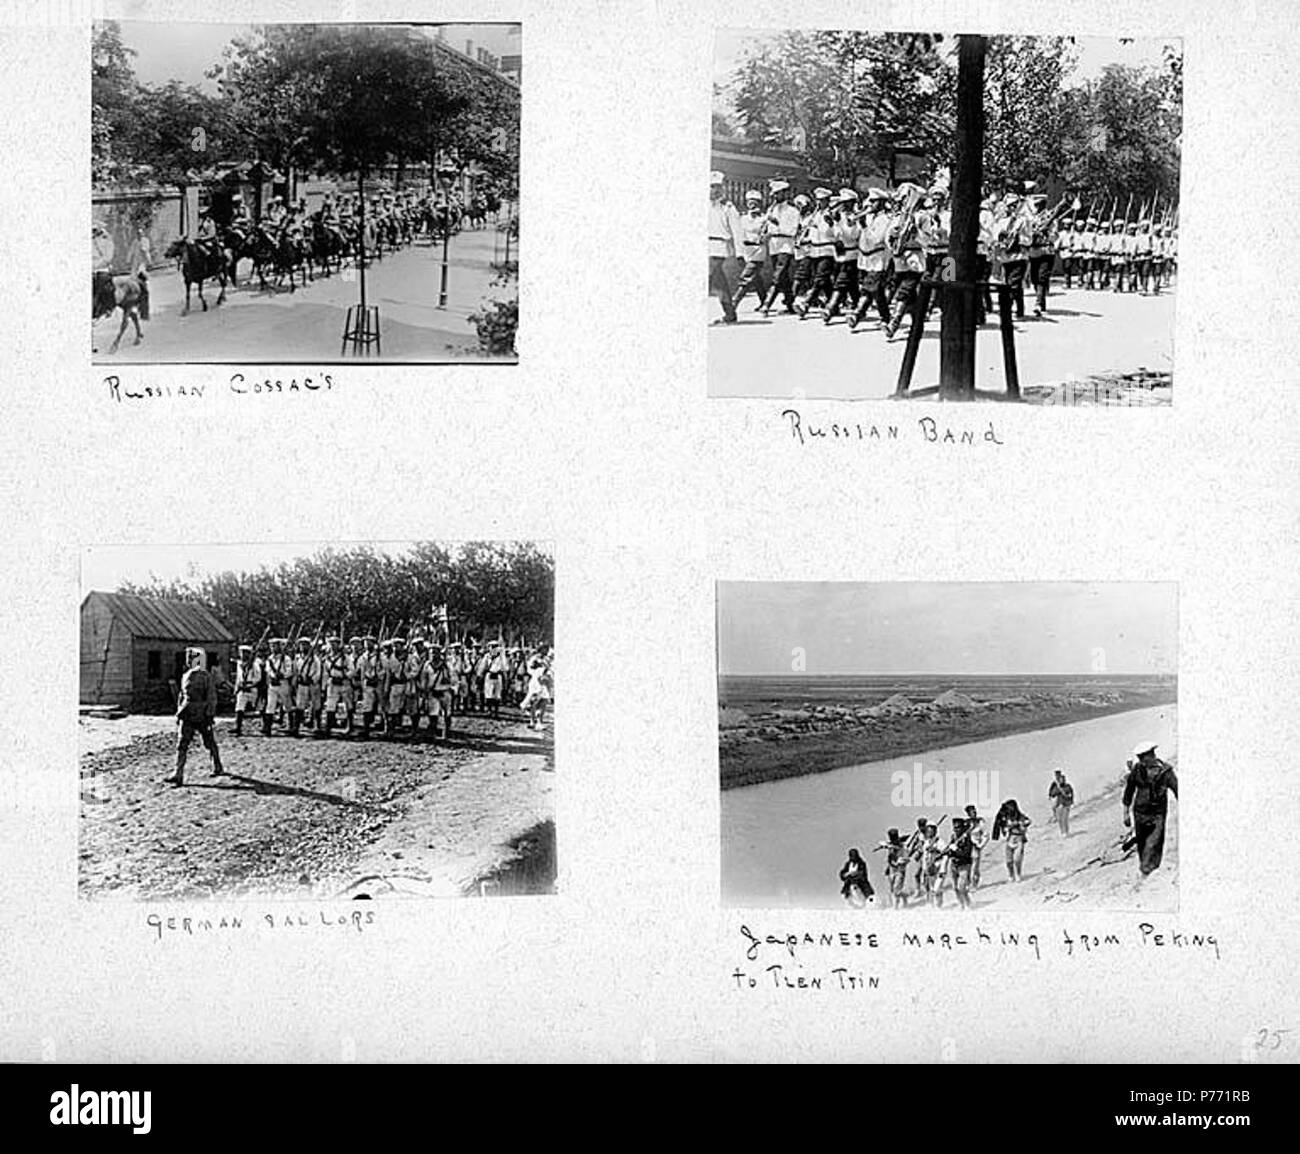 . English: 7.25 International soldiers, ca. 1899-1901 . English: Captions on album page: Russian Cossac's [i.e. Cossacks]; Russian band; German sailors; Japanese marching from Peking to Tien Tsin . PH Coll 241.B25a-d Subjects (LCTGM): Soldiers--Russian--China; Sailors--German--China; Soldiers--Japanese--China; Military bands--Russian Subjects (LCSH): China--History--Boxer Rebellion, 1899-1901; Cossacks--China  . circa 1899-1901 1 725 International soldiers, ca 1899-1901 (CHANDLESS 70) Stock Photo